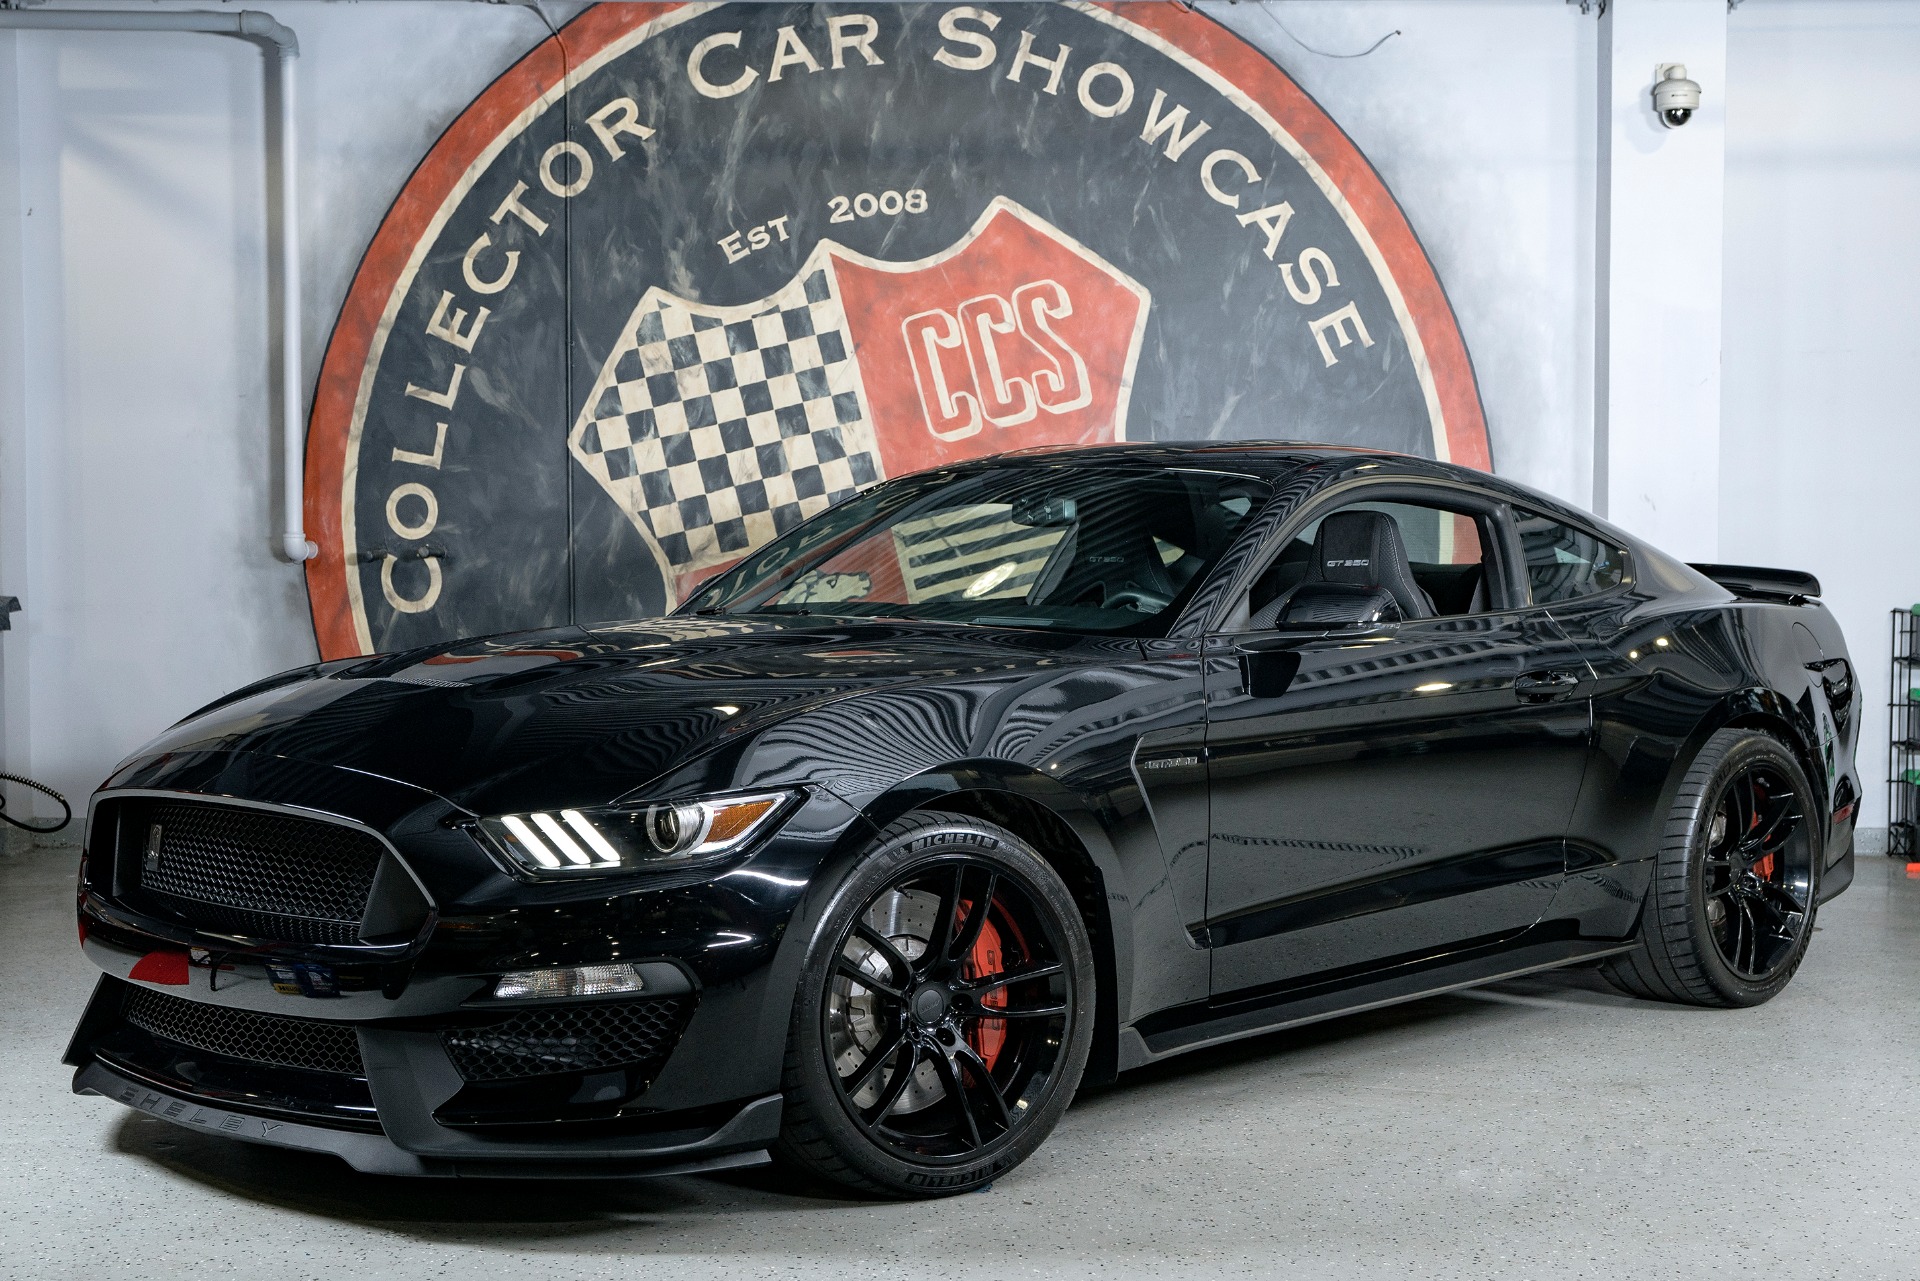 2017 FORD MUSTANG Shelby GT350 Stock # 1554 for sale near Oyster Bay, NY |  NY FORD Dealer